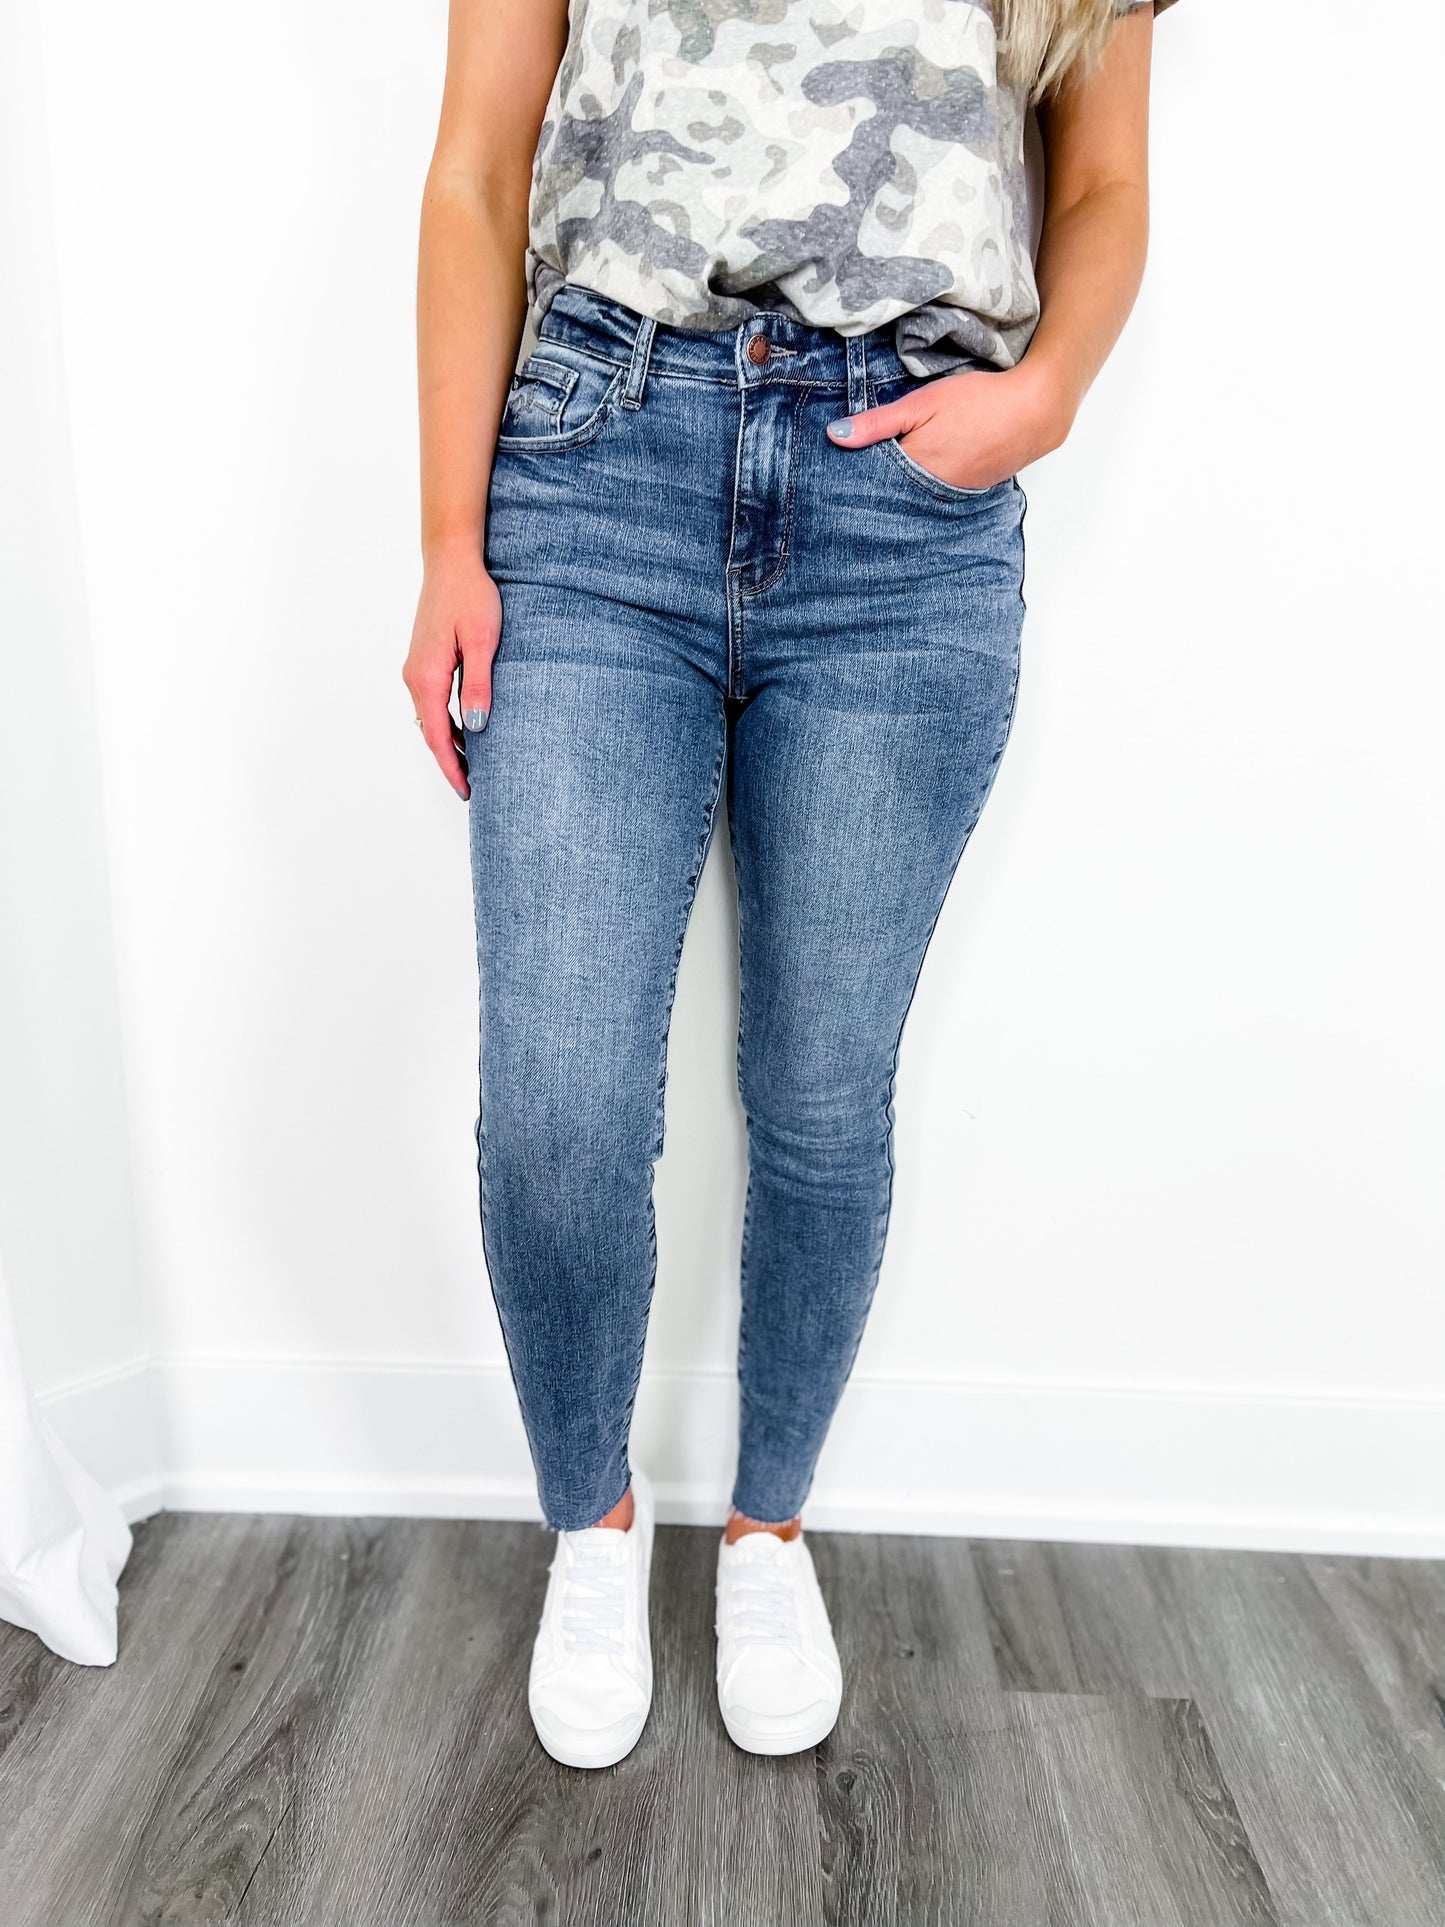 Judy Blue The Essential Medium Wash High Rise Relaxed Fit Jeans